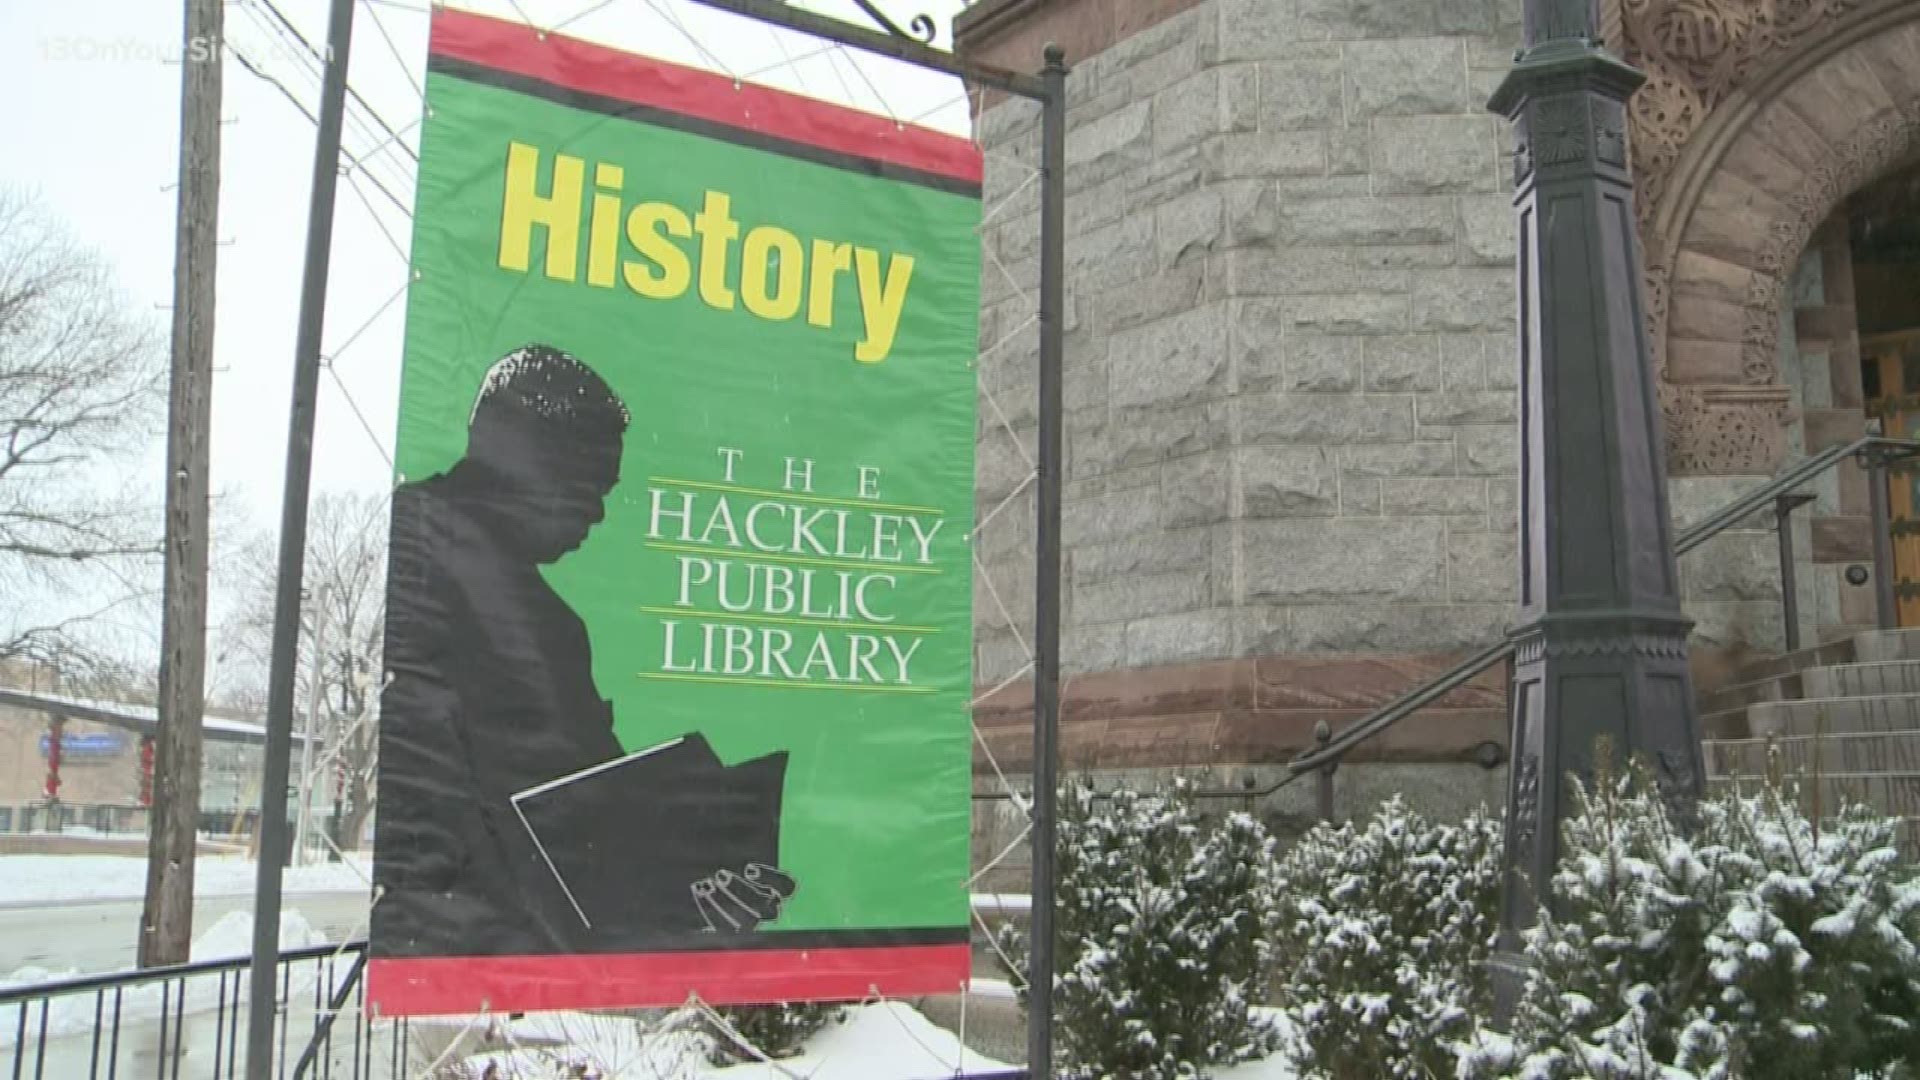 Throughout the month of February, the Hackley Public Library will host a series of events to celebrate Black History Month.